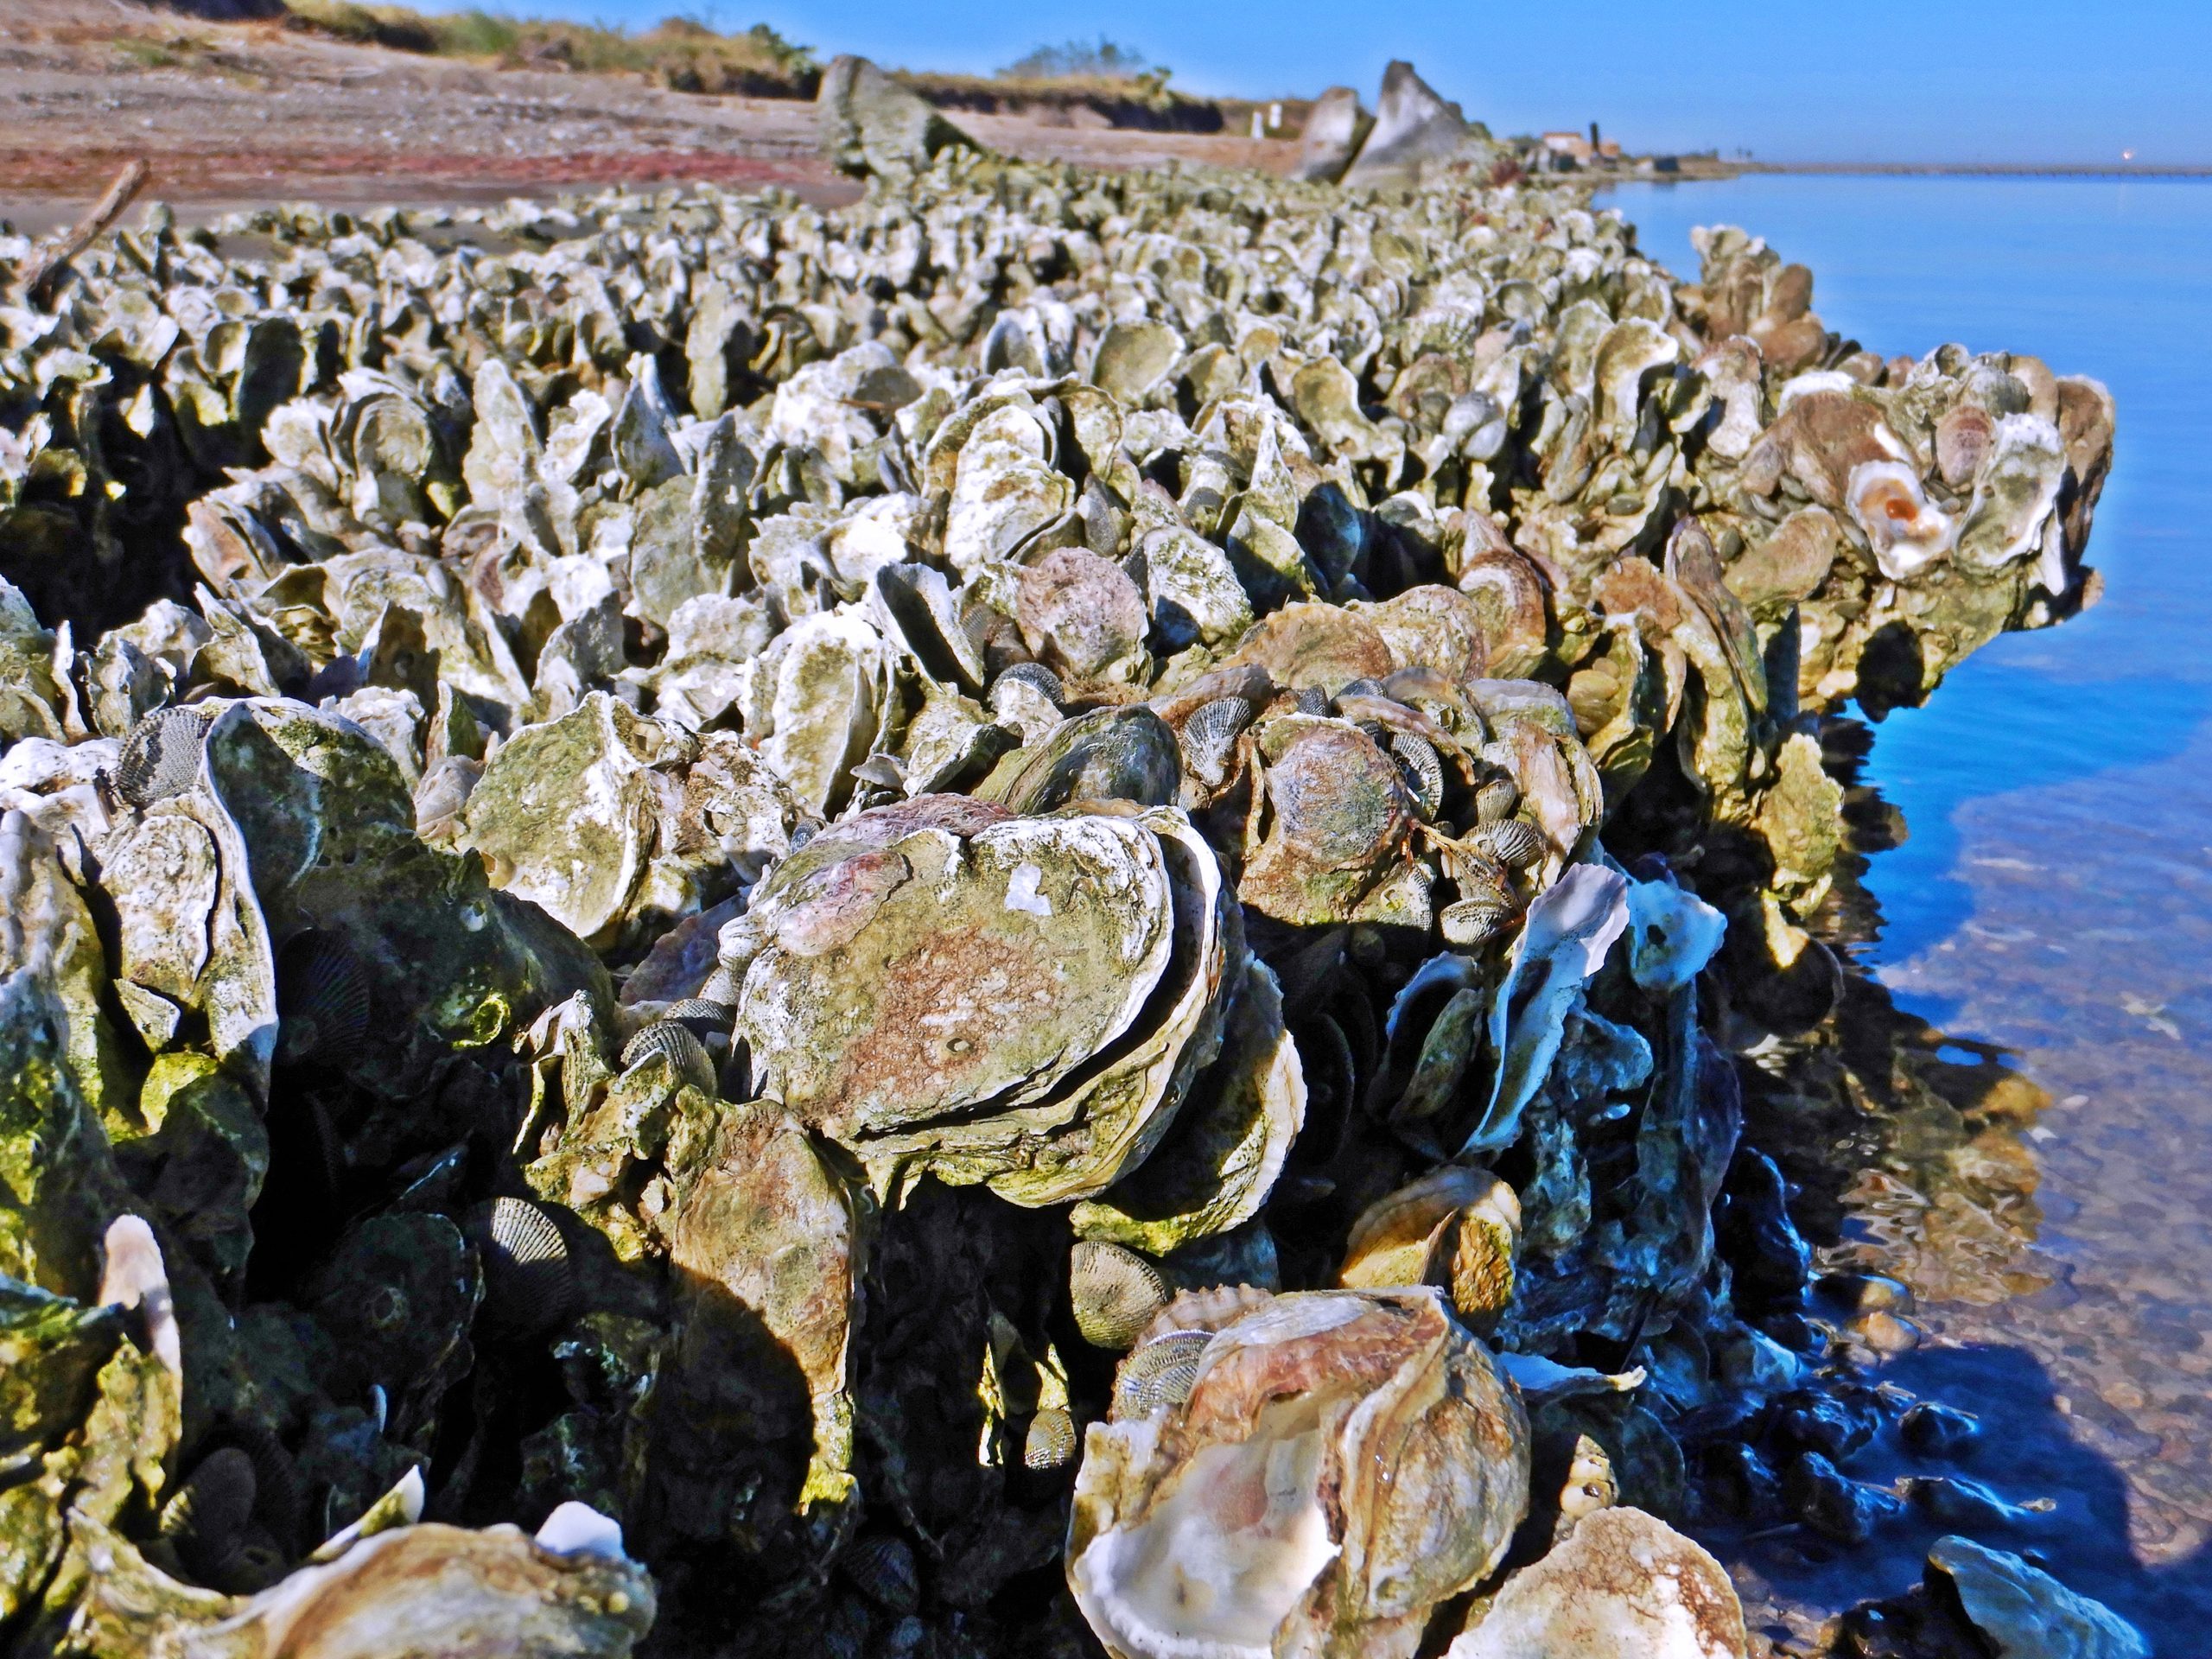 UPDATE: TPWD Seeks Input on Proposed Oyster Closures